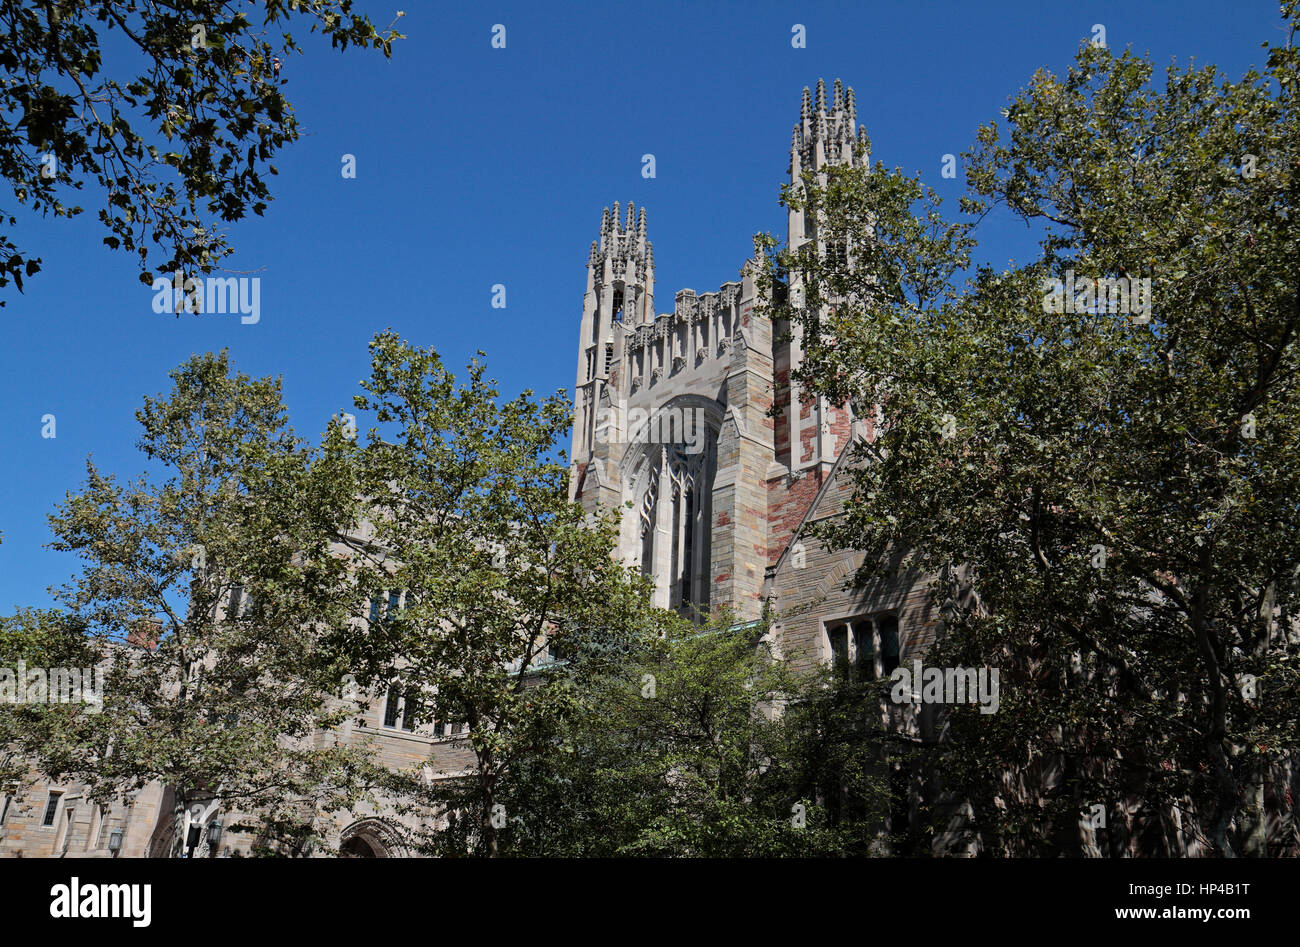 Sterling Law Building, nach Hause zu Yale Law School, Yale University, New Haven, Connecticut, USA. Stockfoto